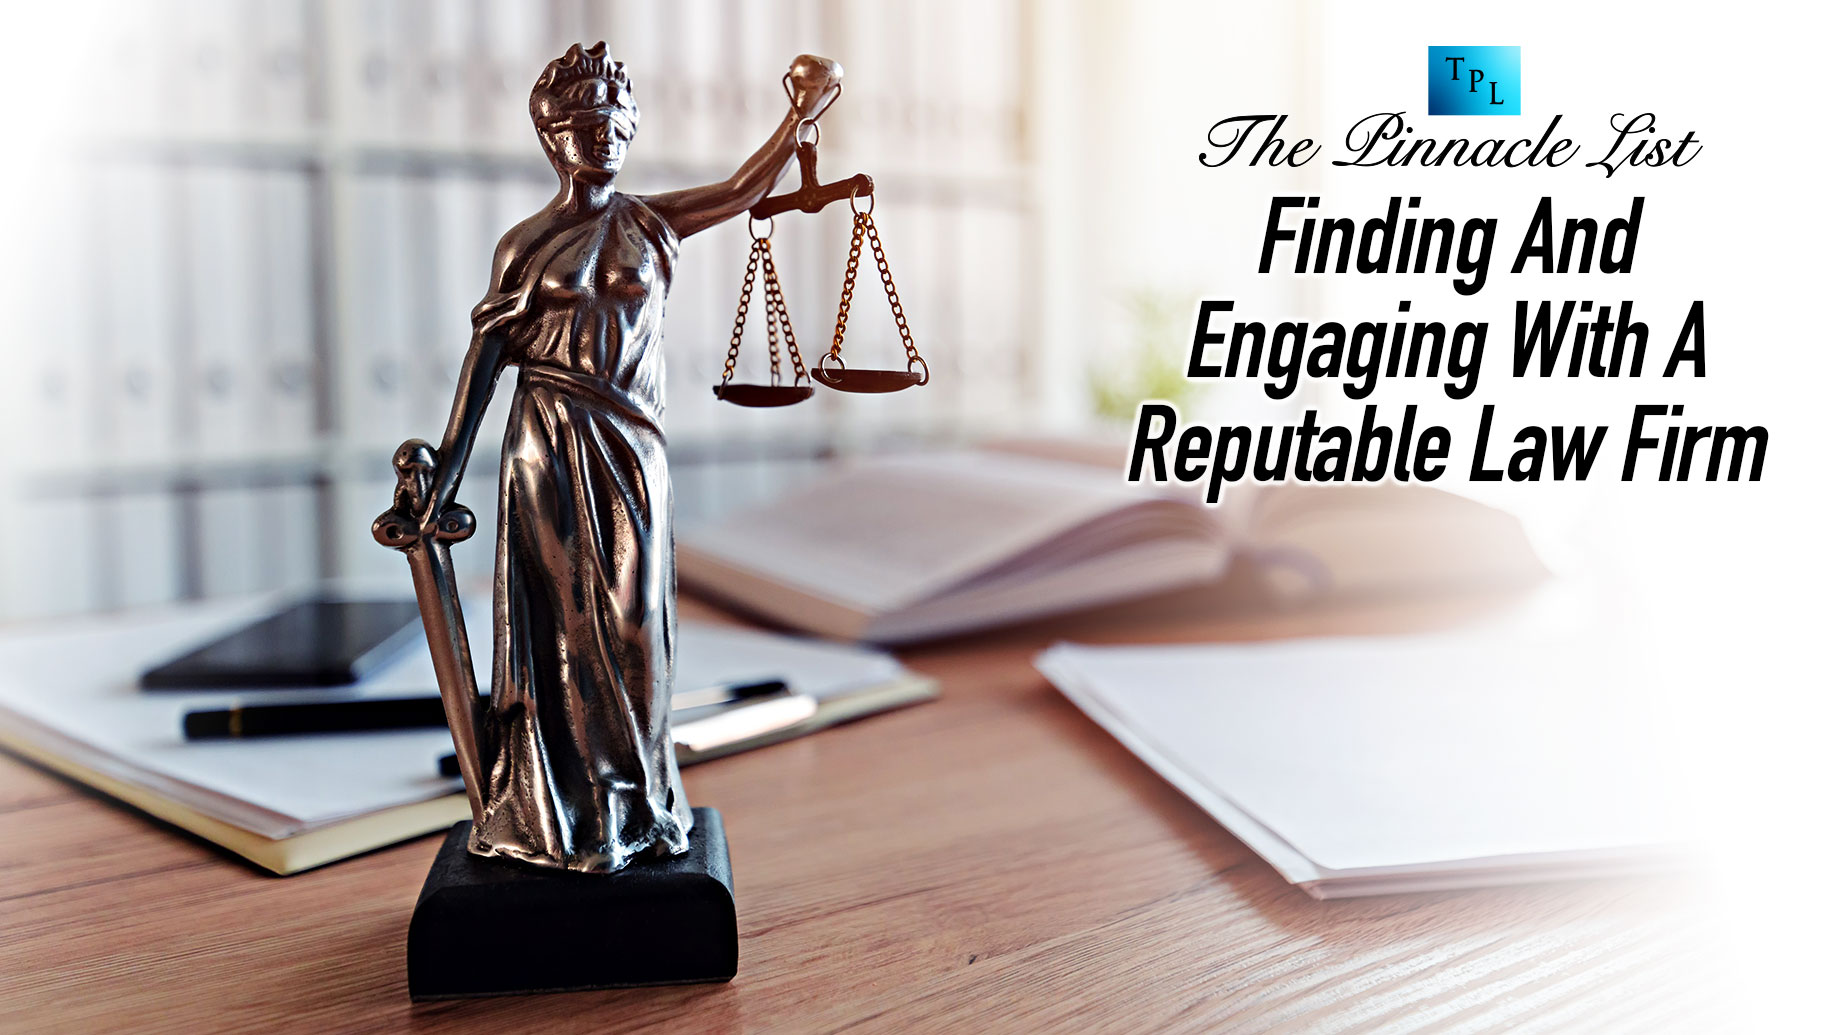 Finding And Engaging With A Reputable Law Firm